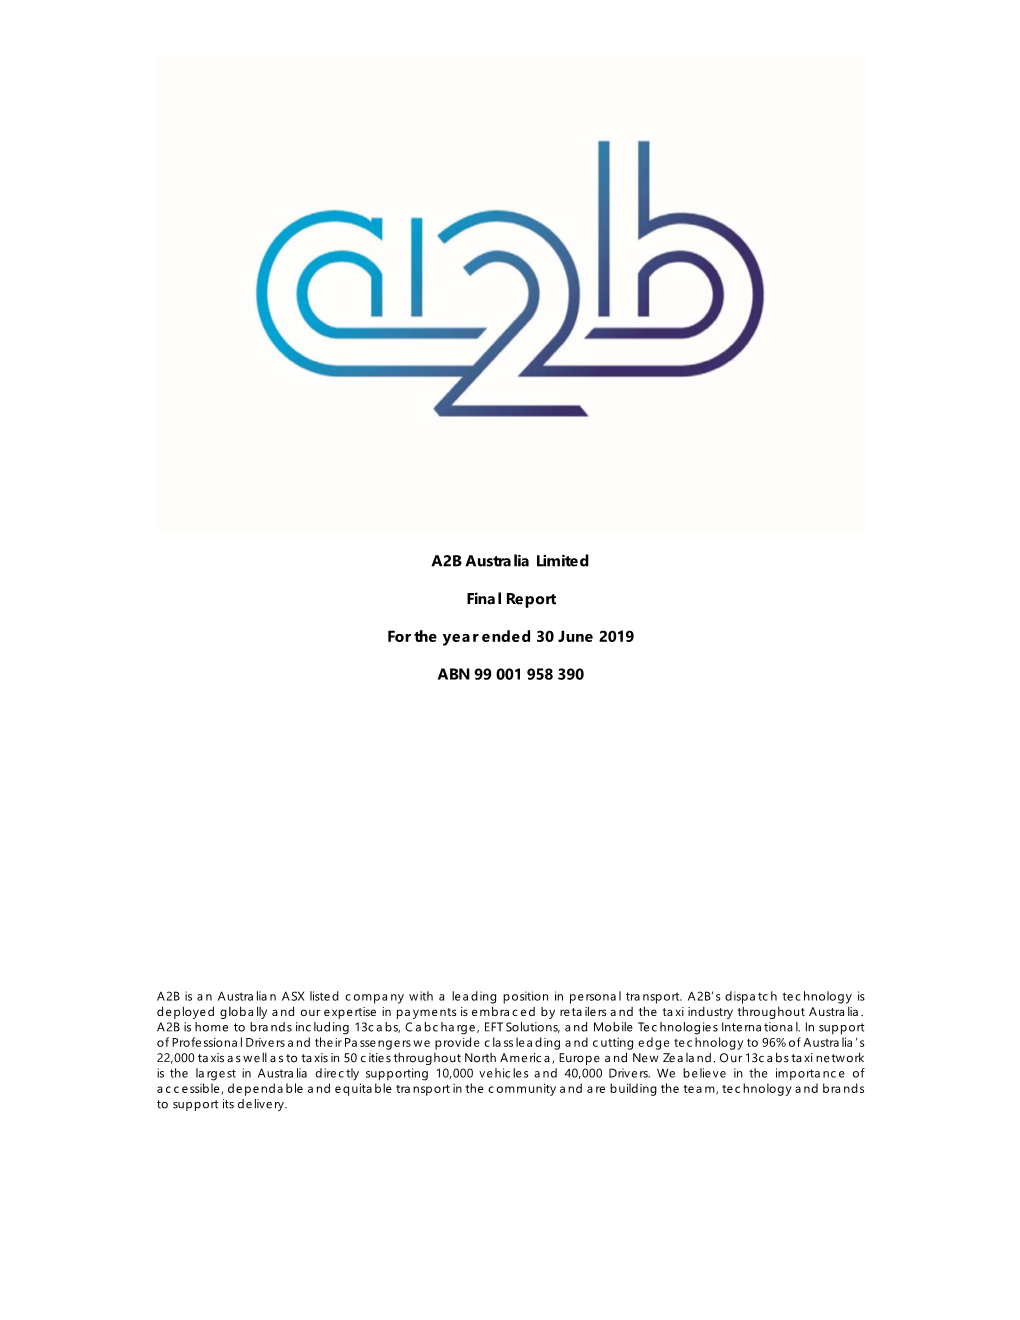 A2B Australia Limited Final Report for the Year Ended 30 June 2019 ABN